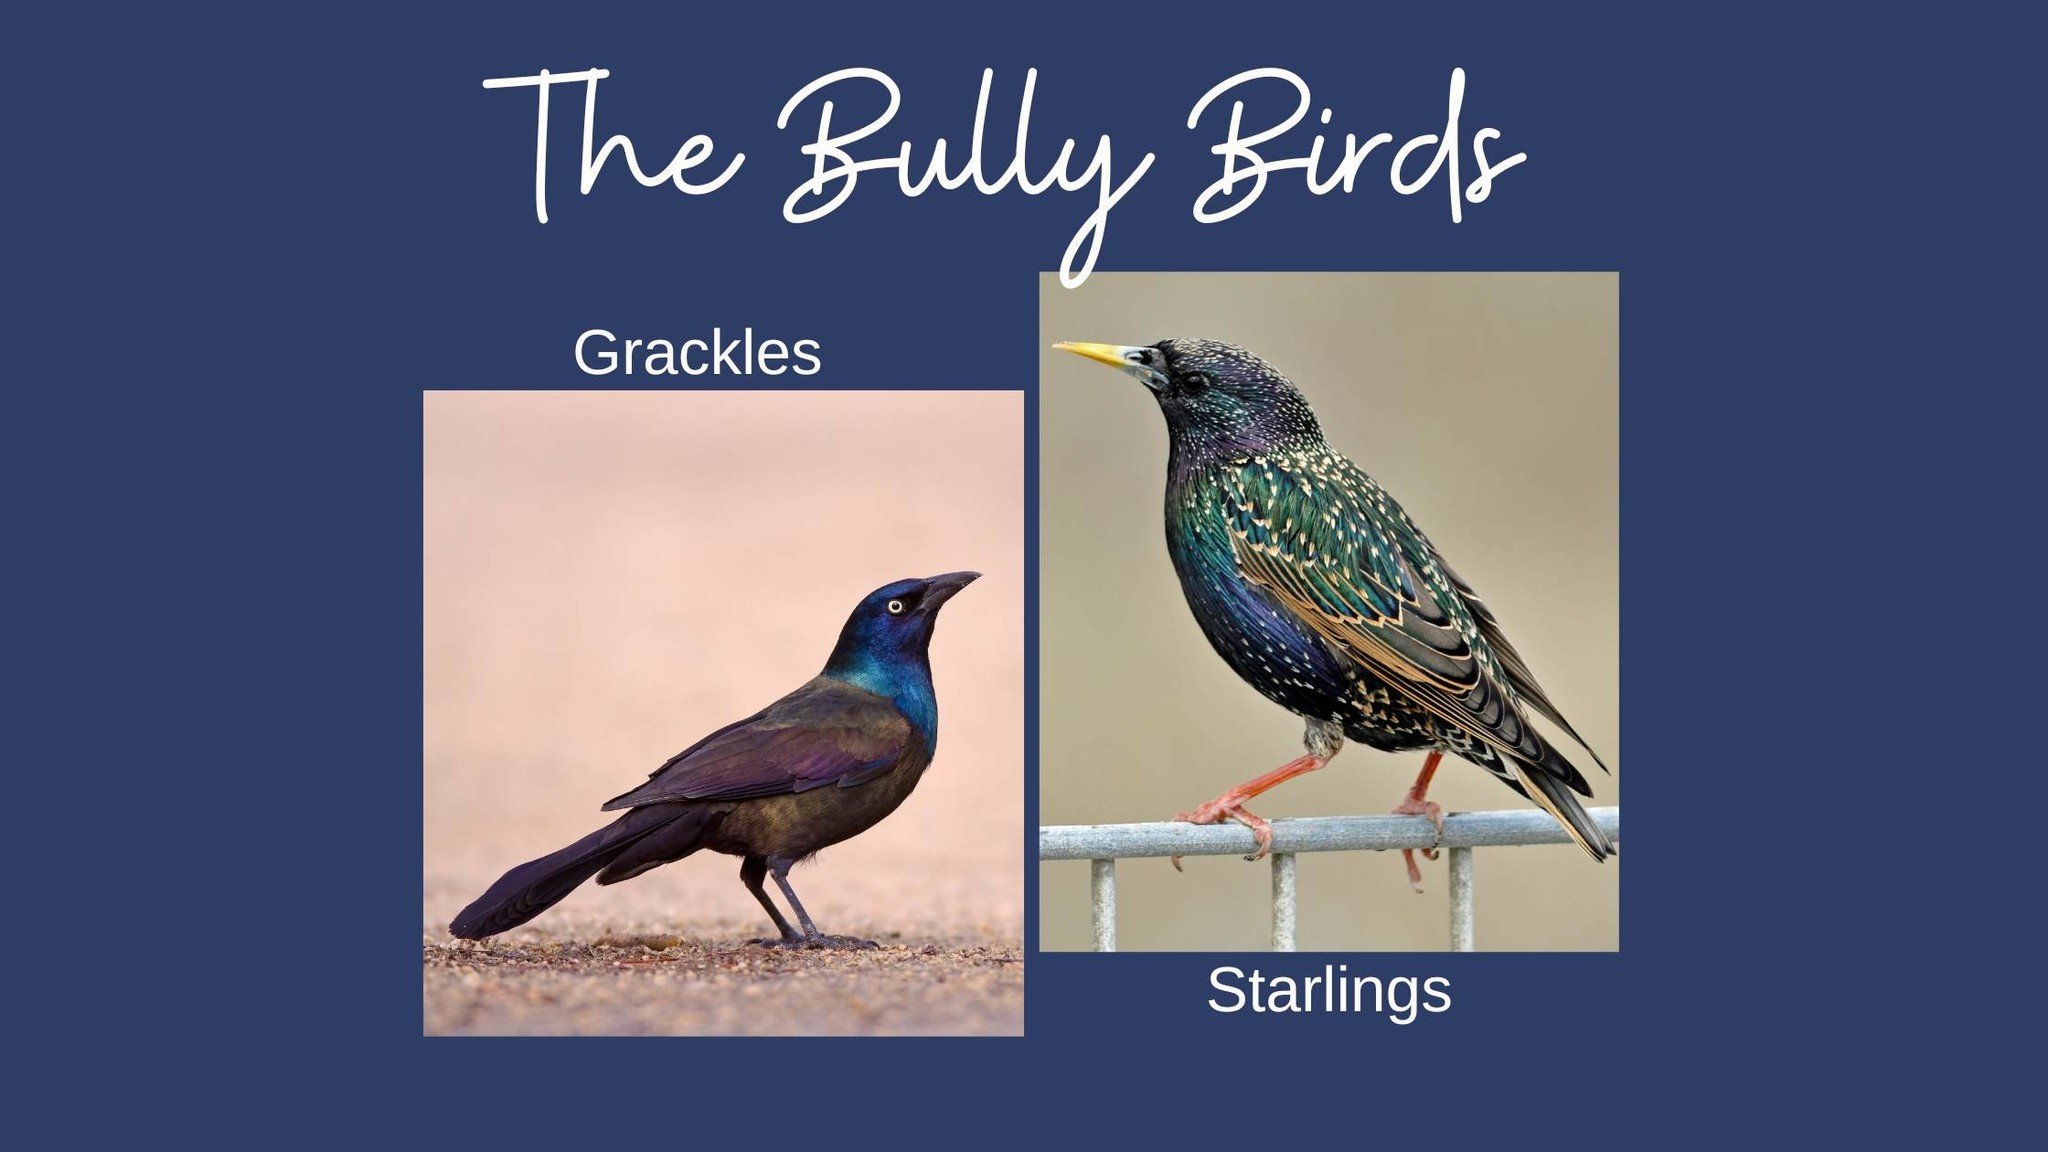 Grackles and Starlings